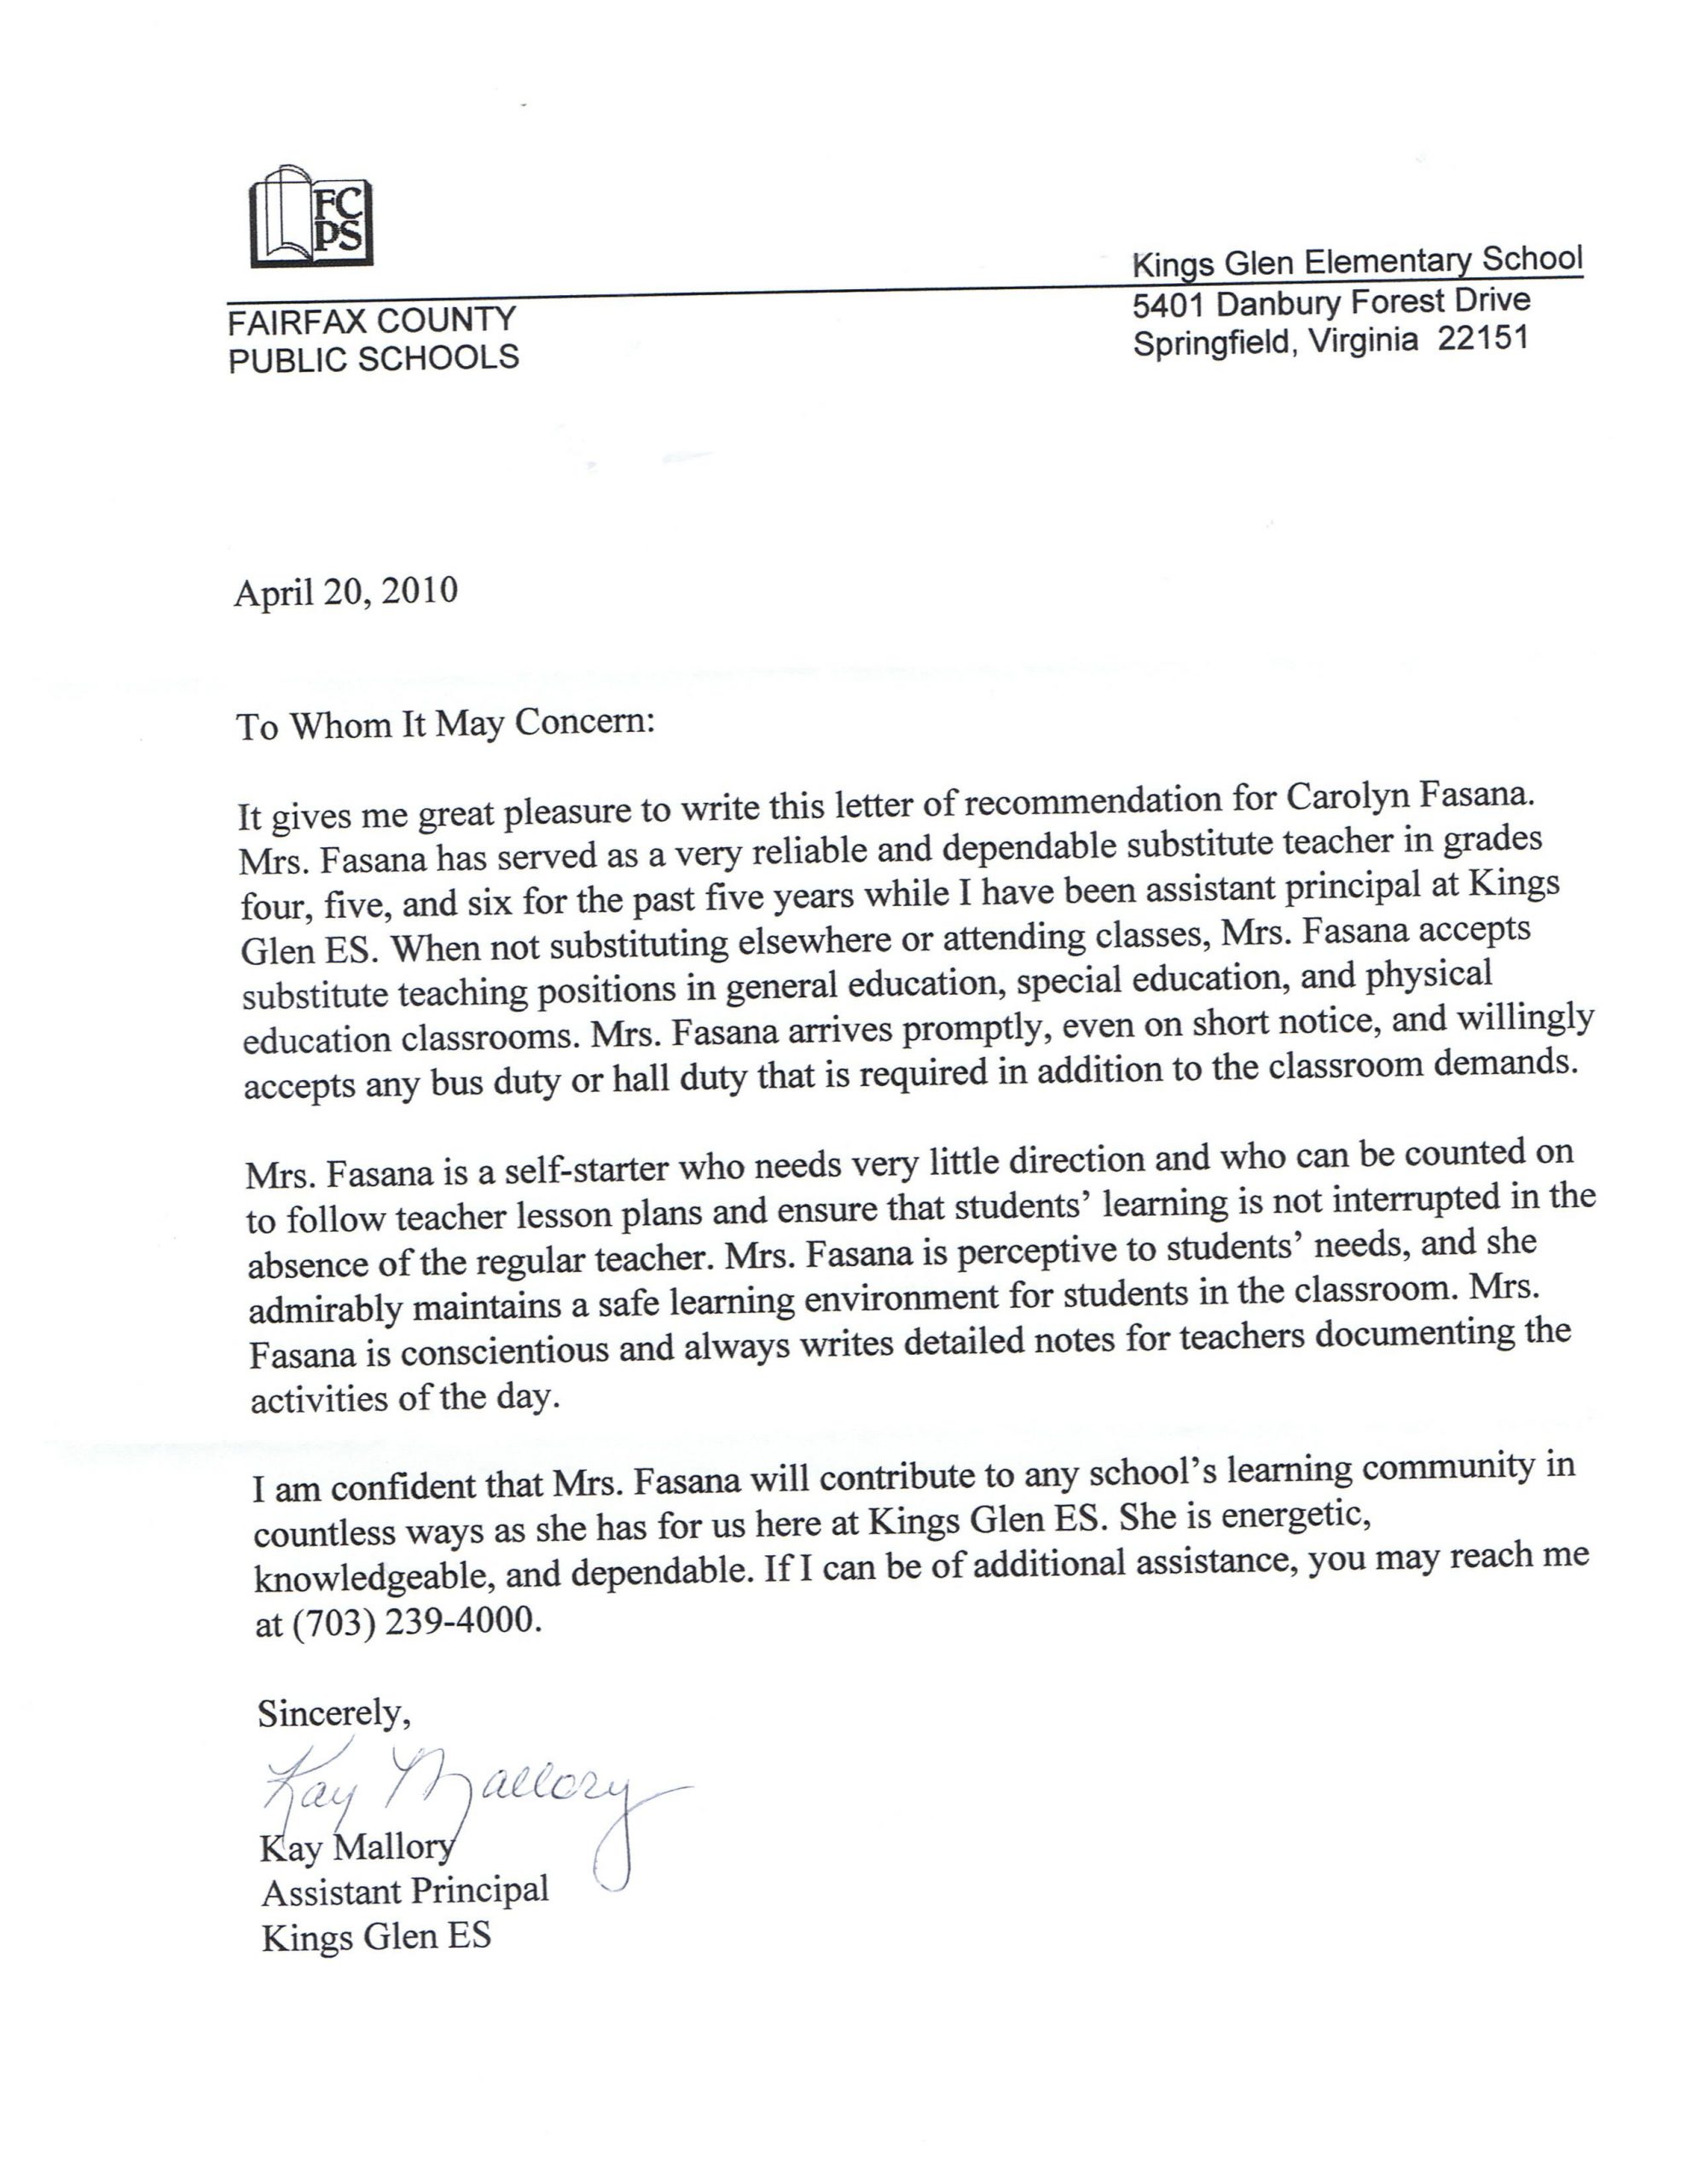 Professional Letter Of Recommendationletter Of With Regard To Proportions 2550 X 3300 1 Scaled 